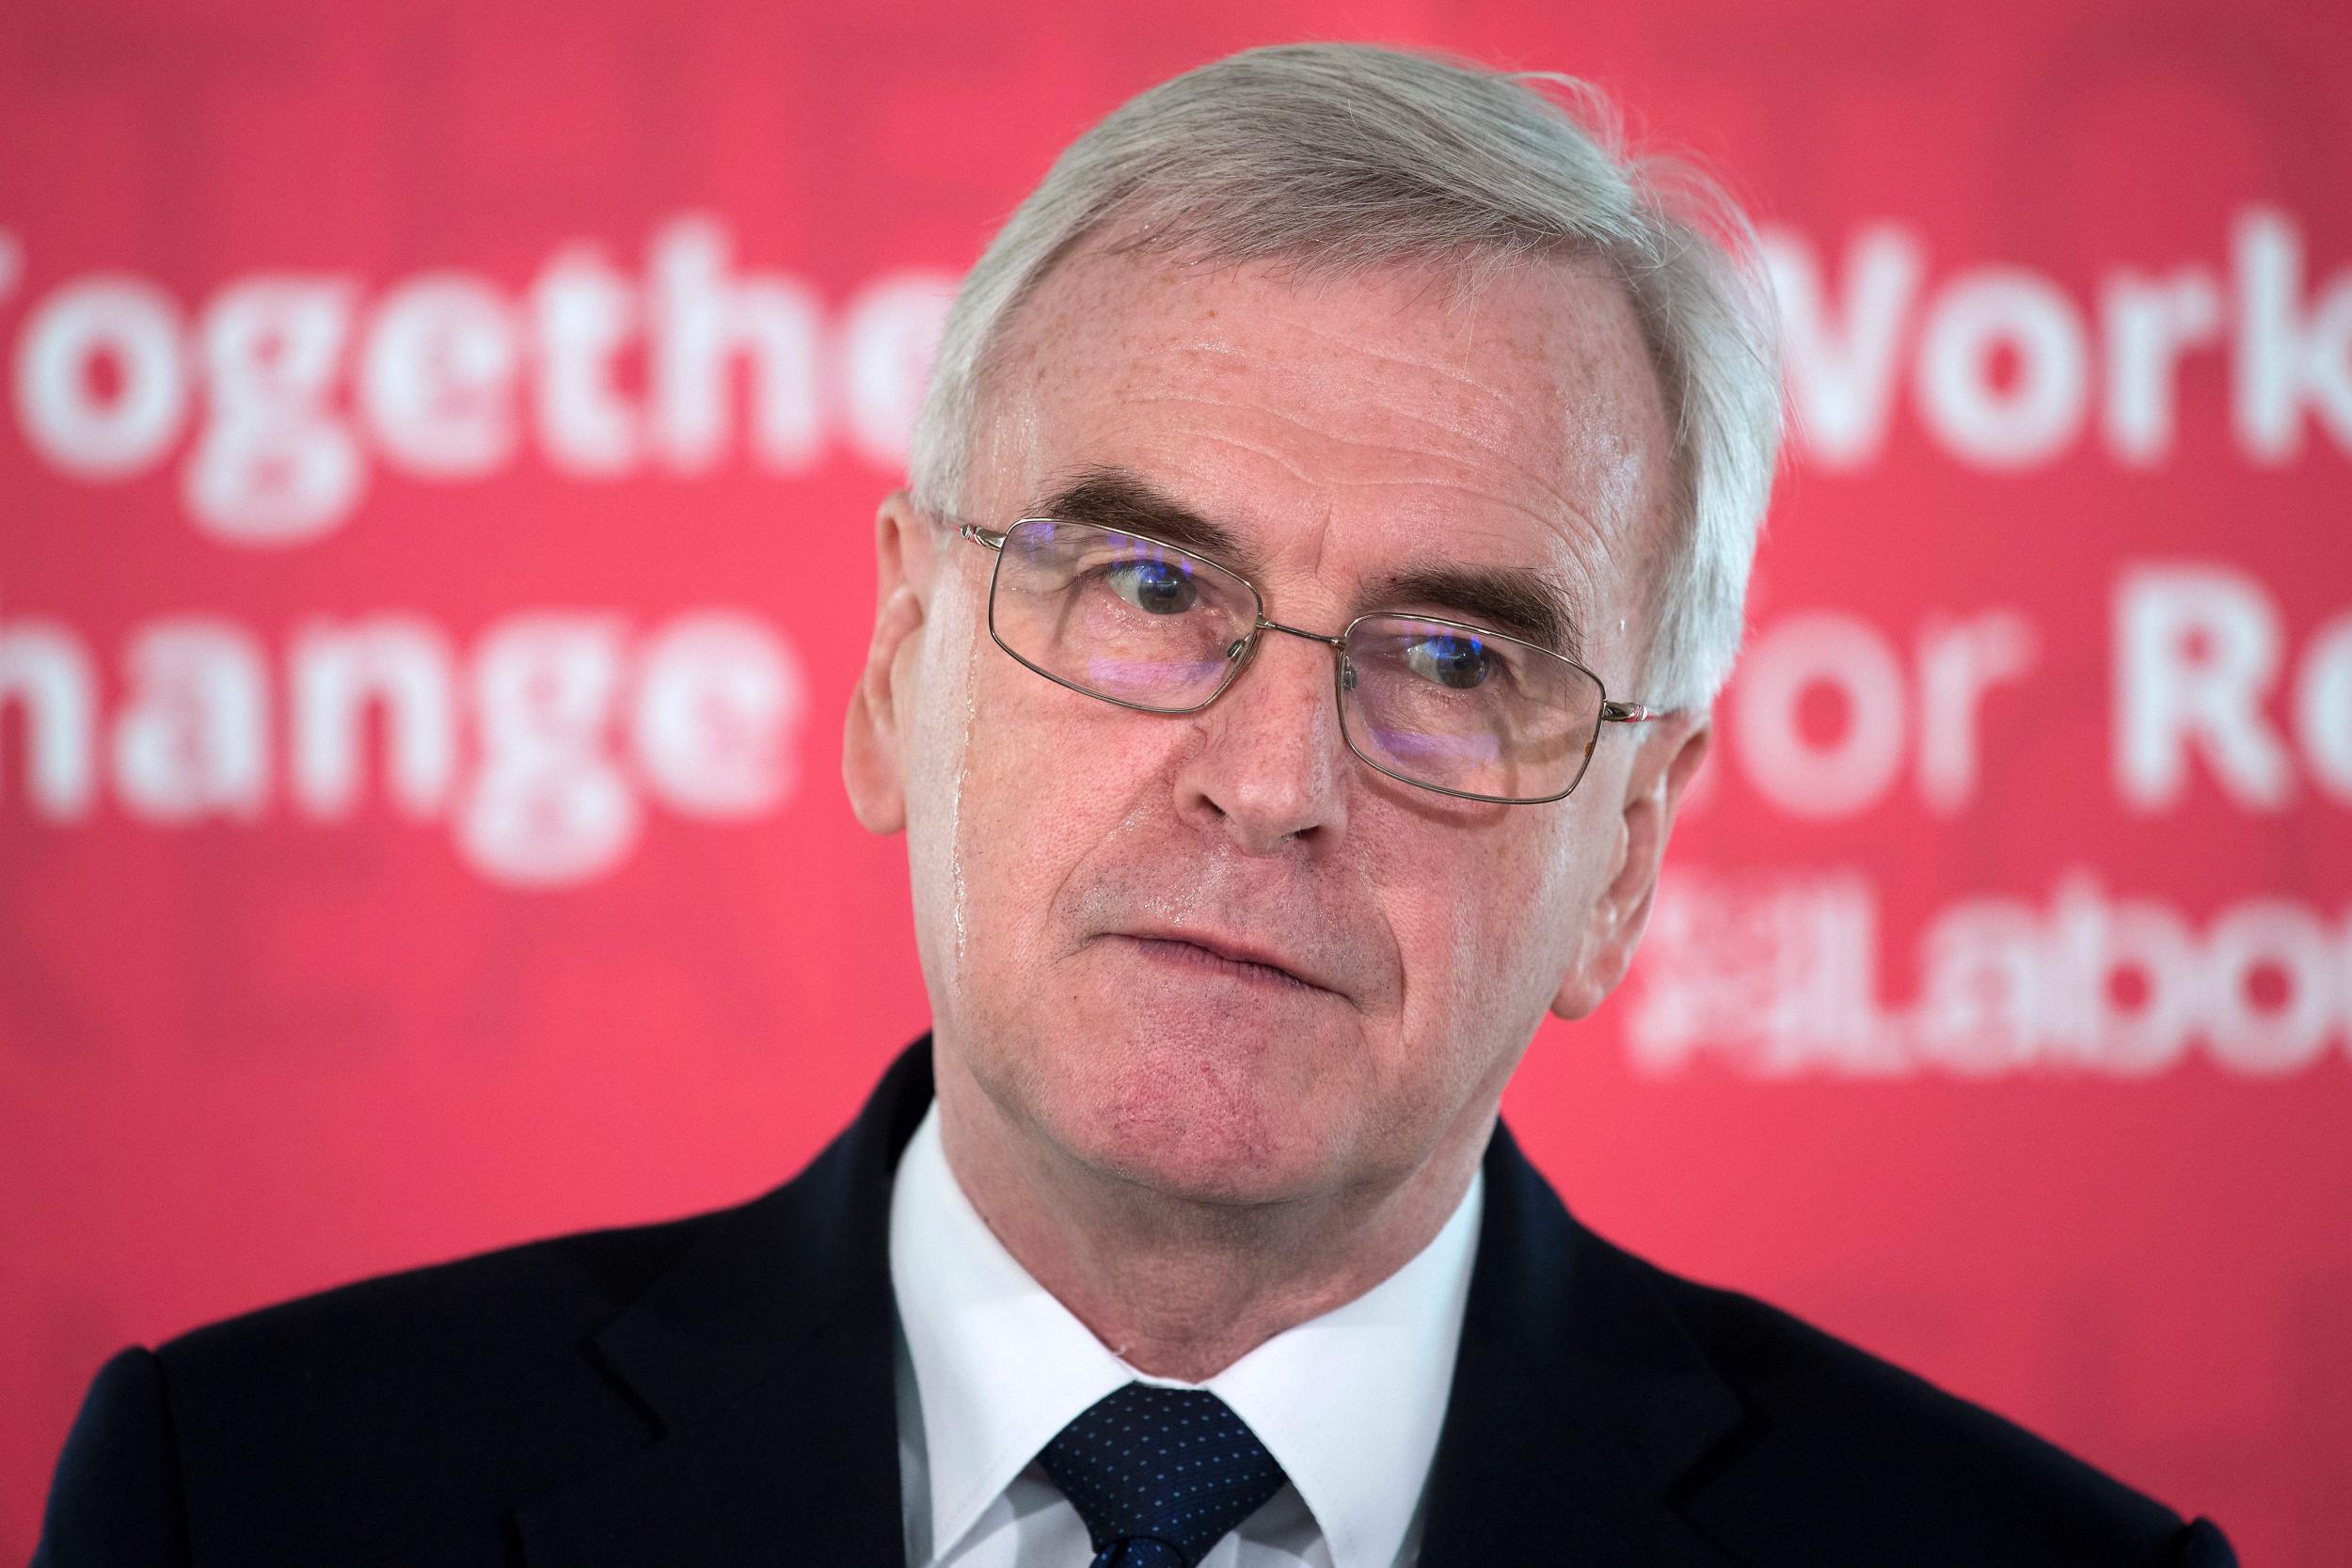 John McDonnell’s speech came a week before Mr Hammond sets out his fiscal plans at the despatch box next Wednesday